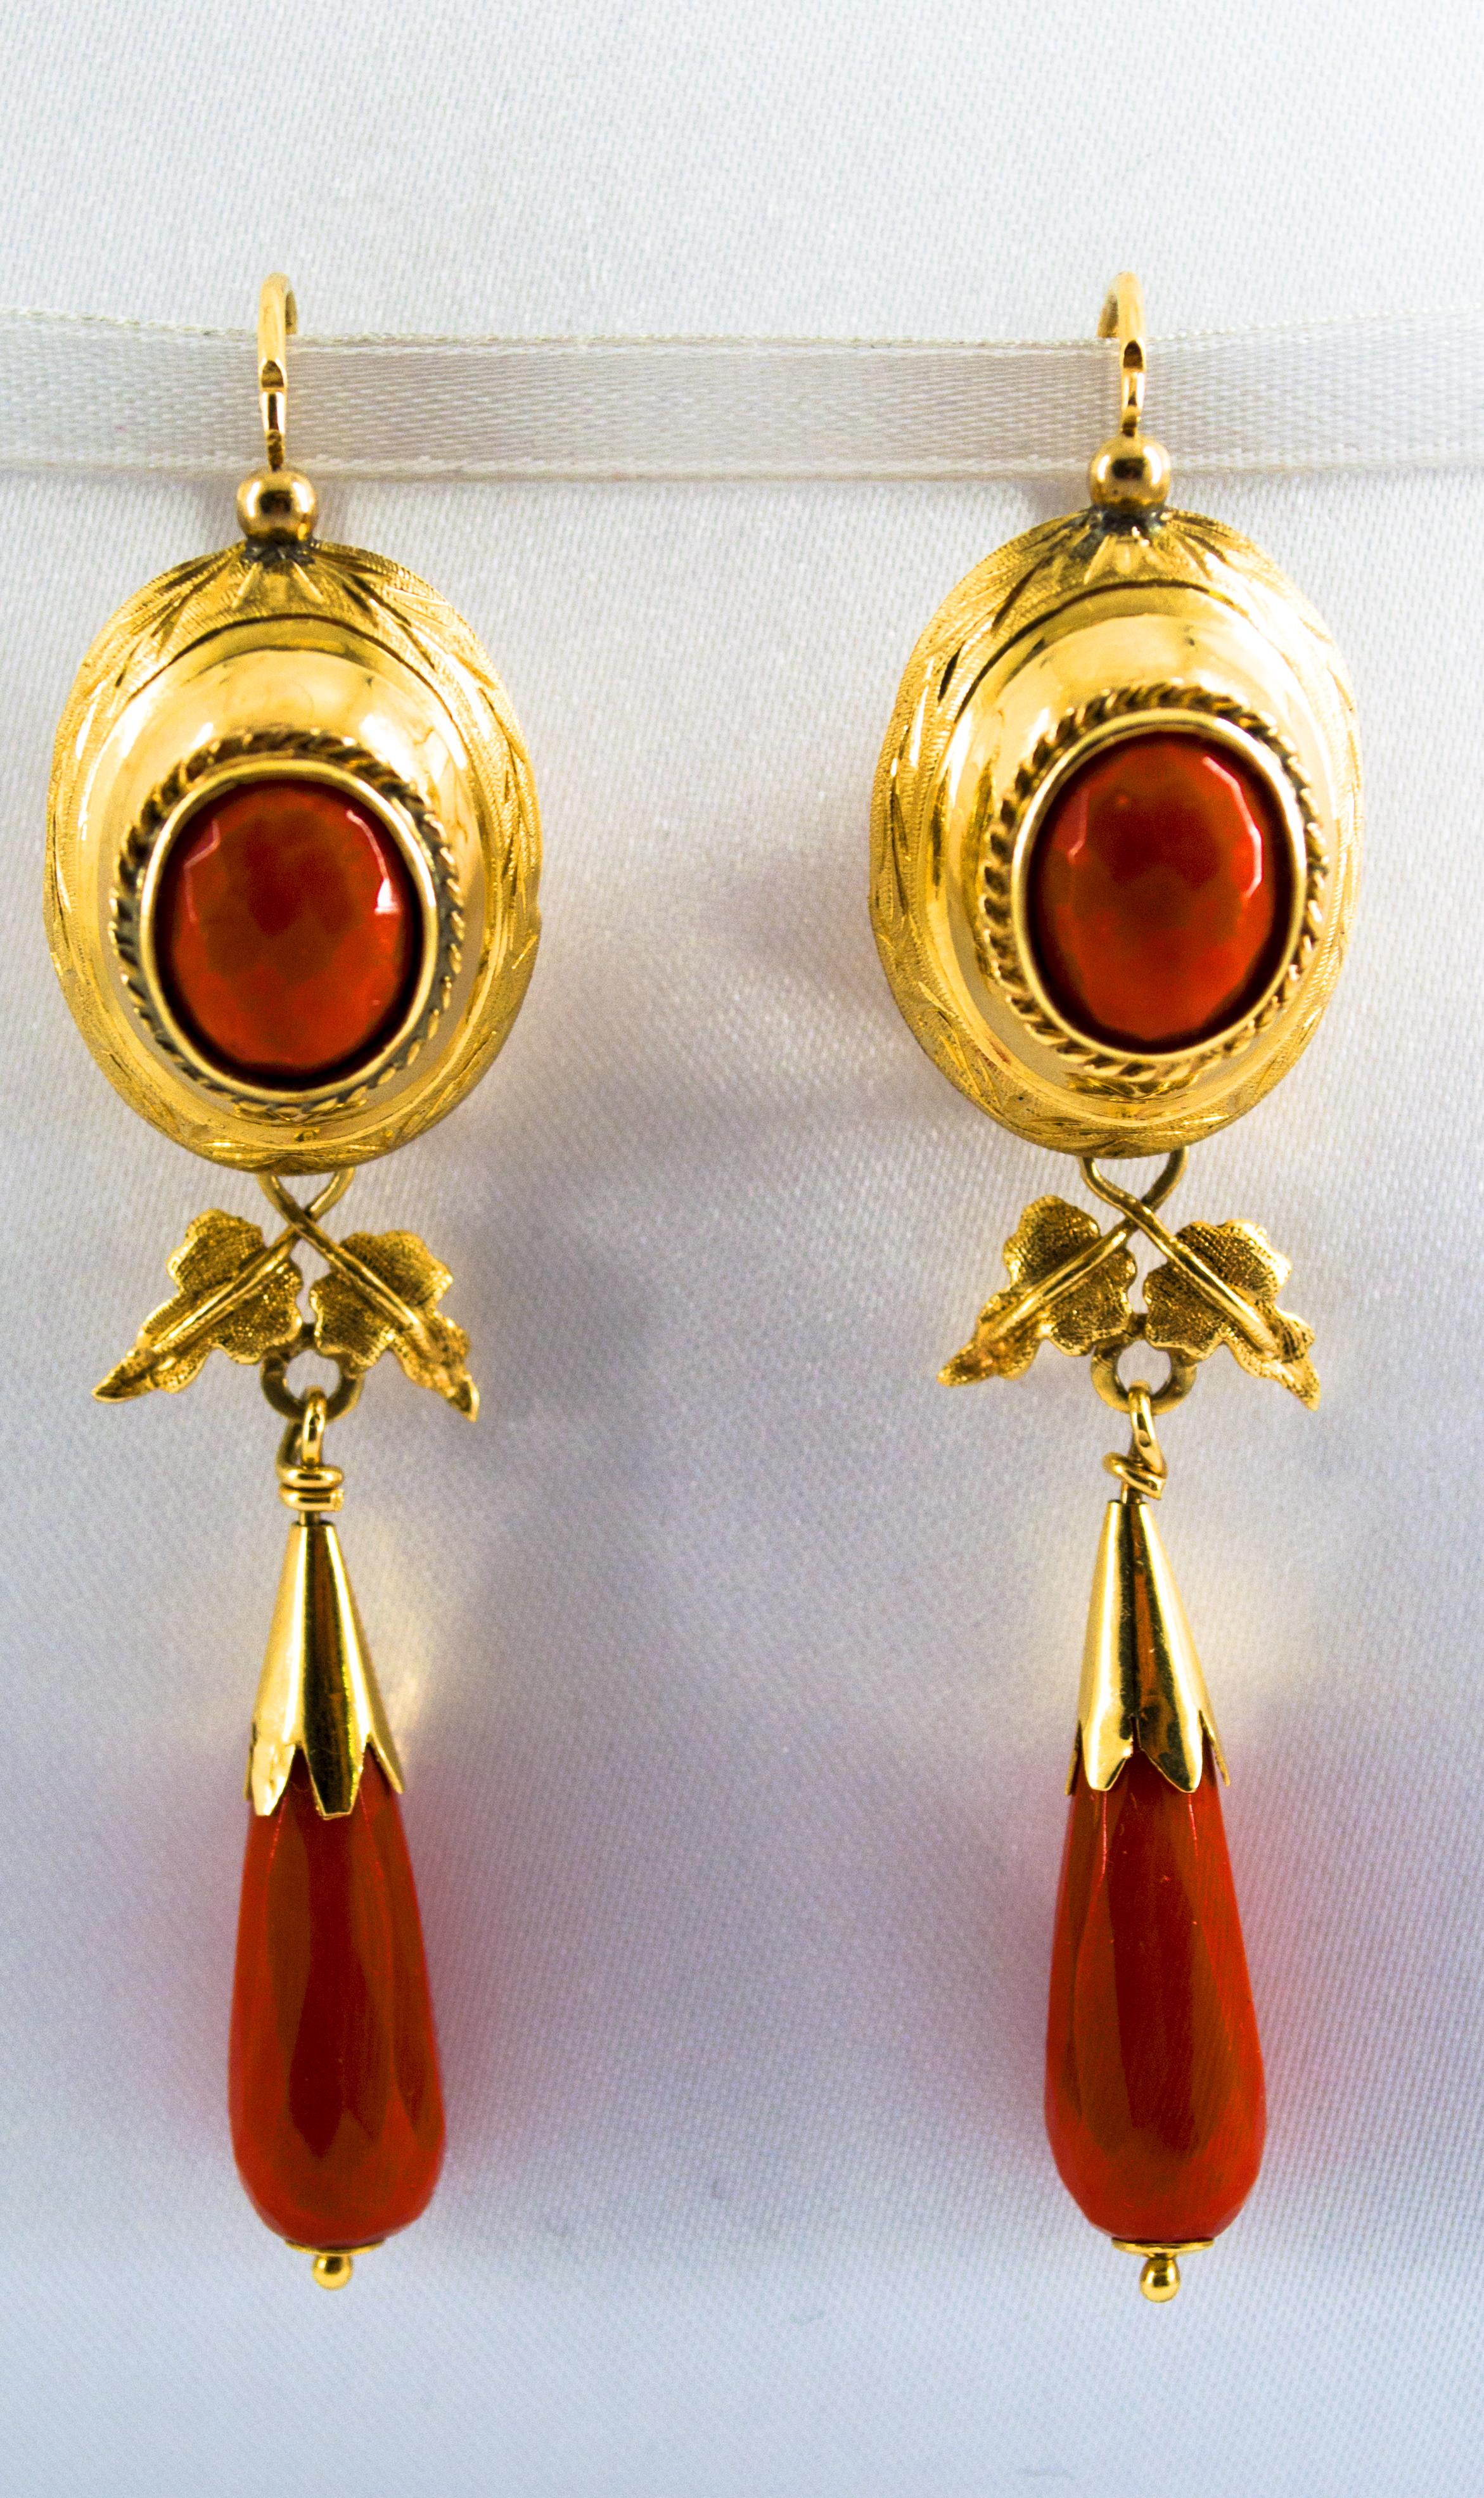 These Earrings are made of 9K Yellow Gold.
These Earrings have Red Mediterranean (Sardinia, Italy) Coral.
All our Earrings have pins for pierced ears but we can change the closure and make any of our Earrings suitable even for non-pierced